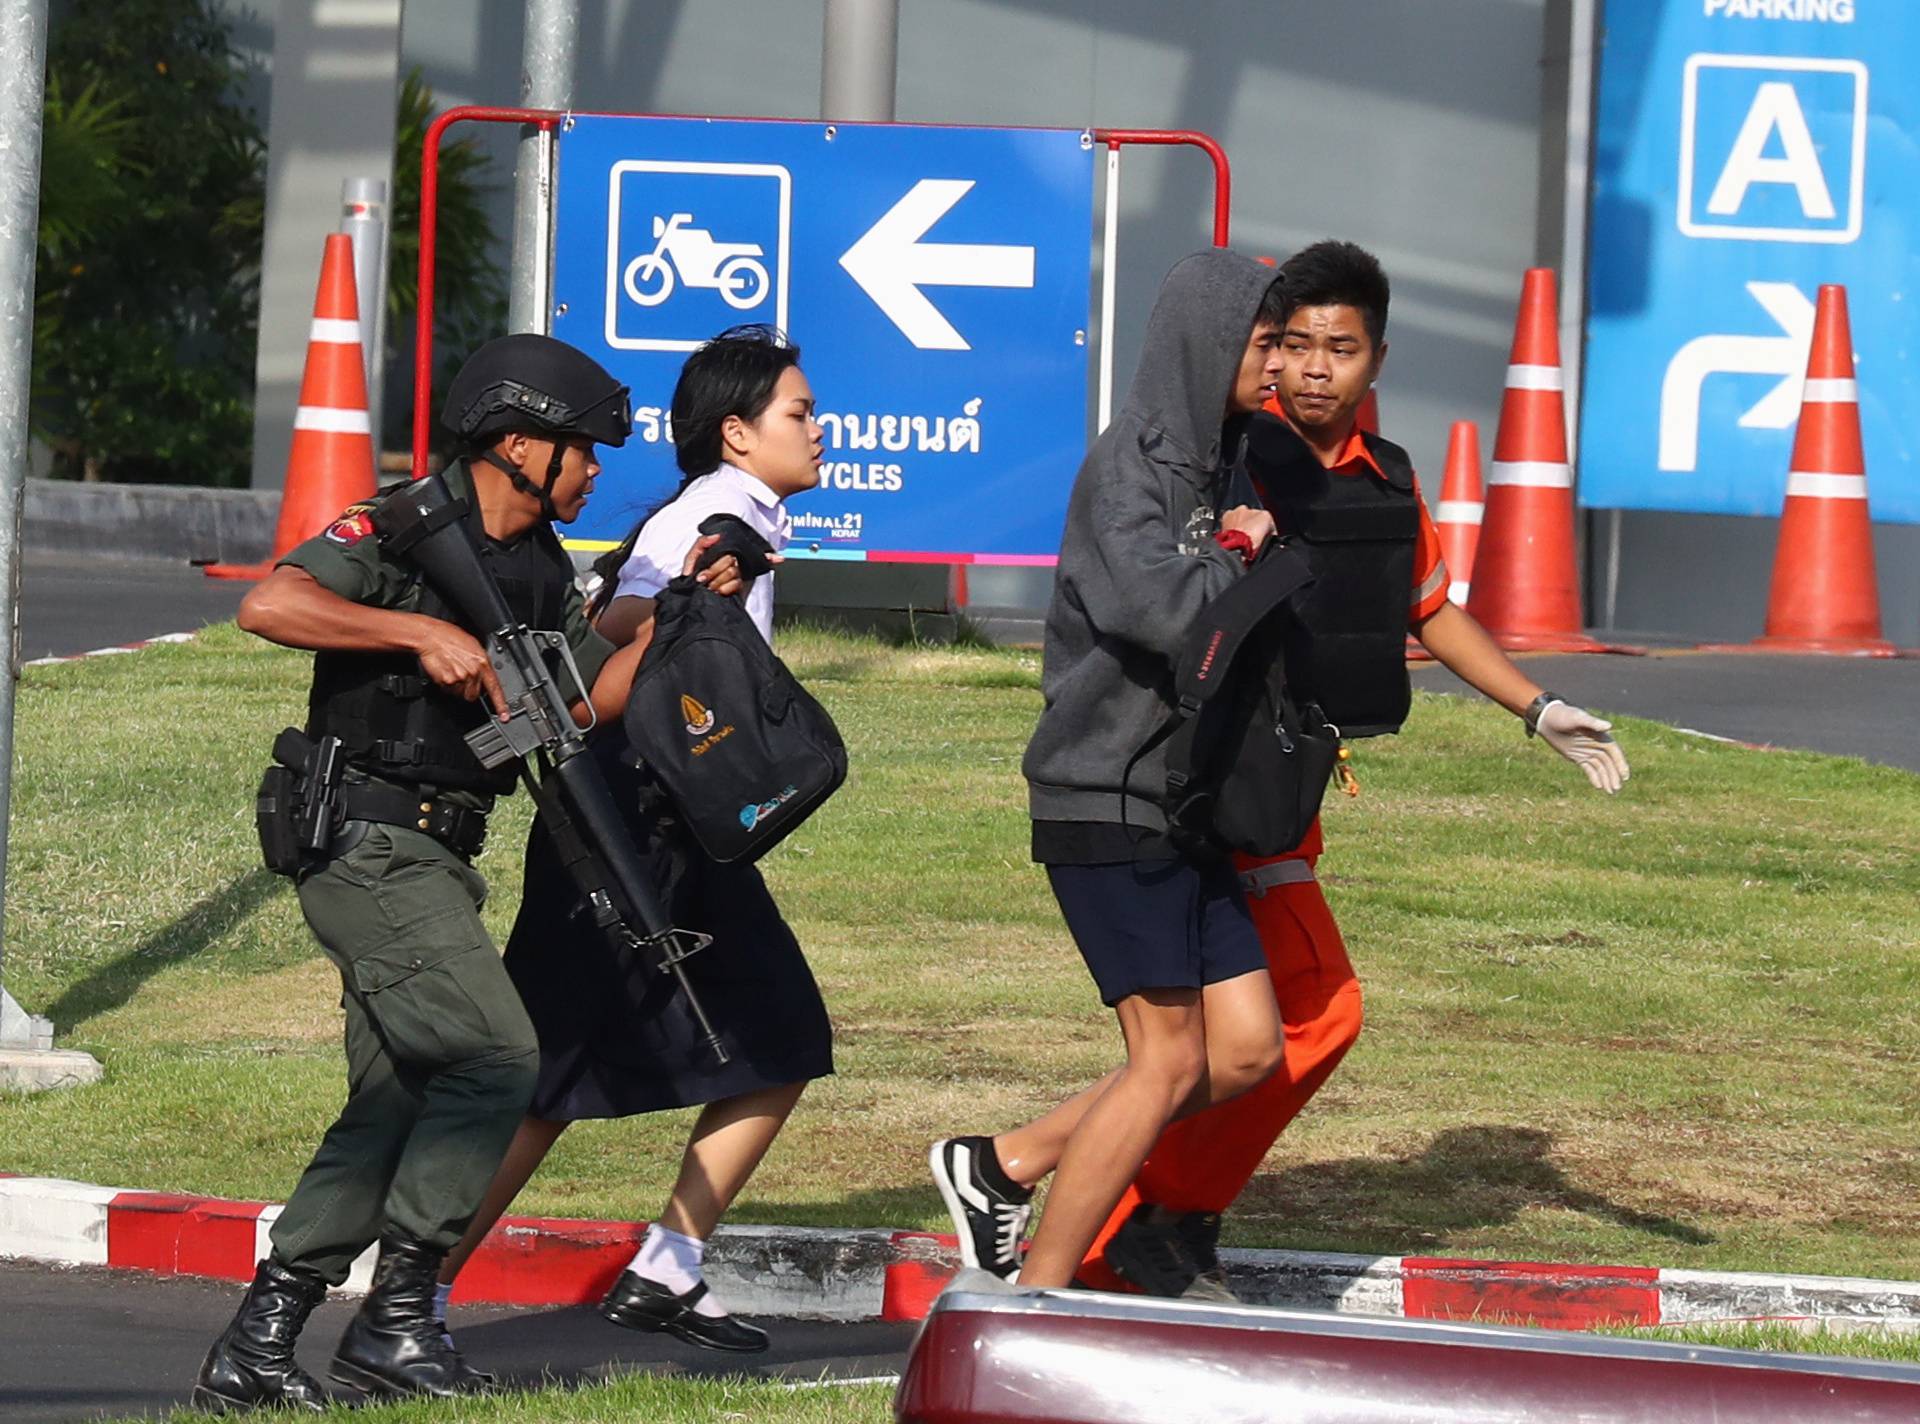 Thai security forces evacuate students stranded inside the Terminal 21 shopping mall following a gun battle to try to stop a soldier on a rampage after a mass shooting, Nakhon Ratchasima